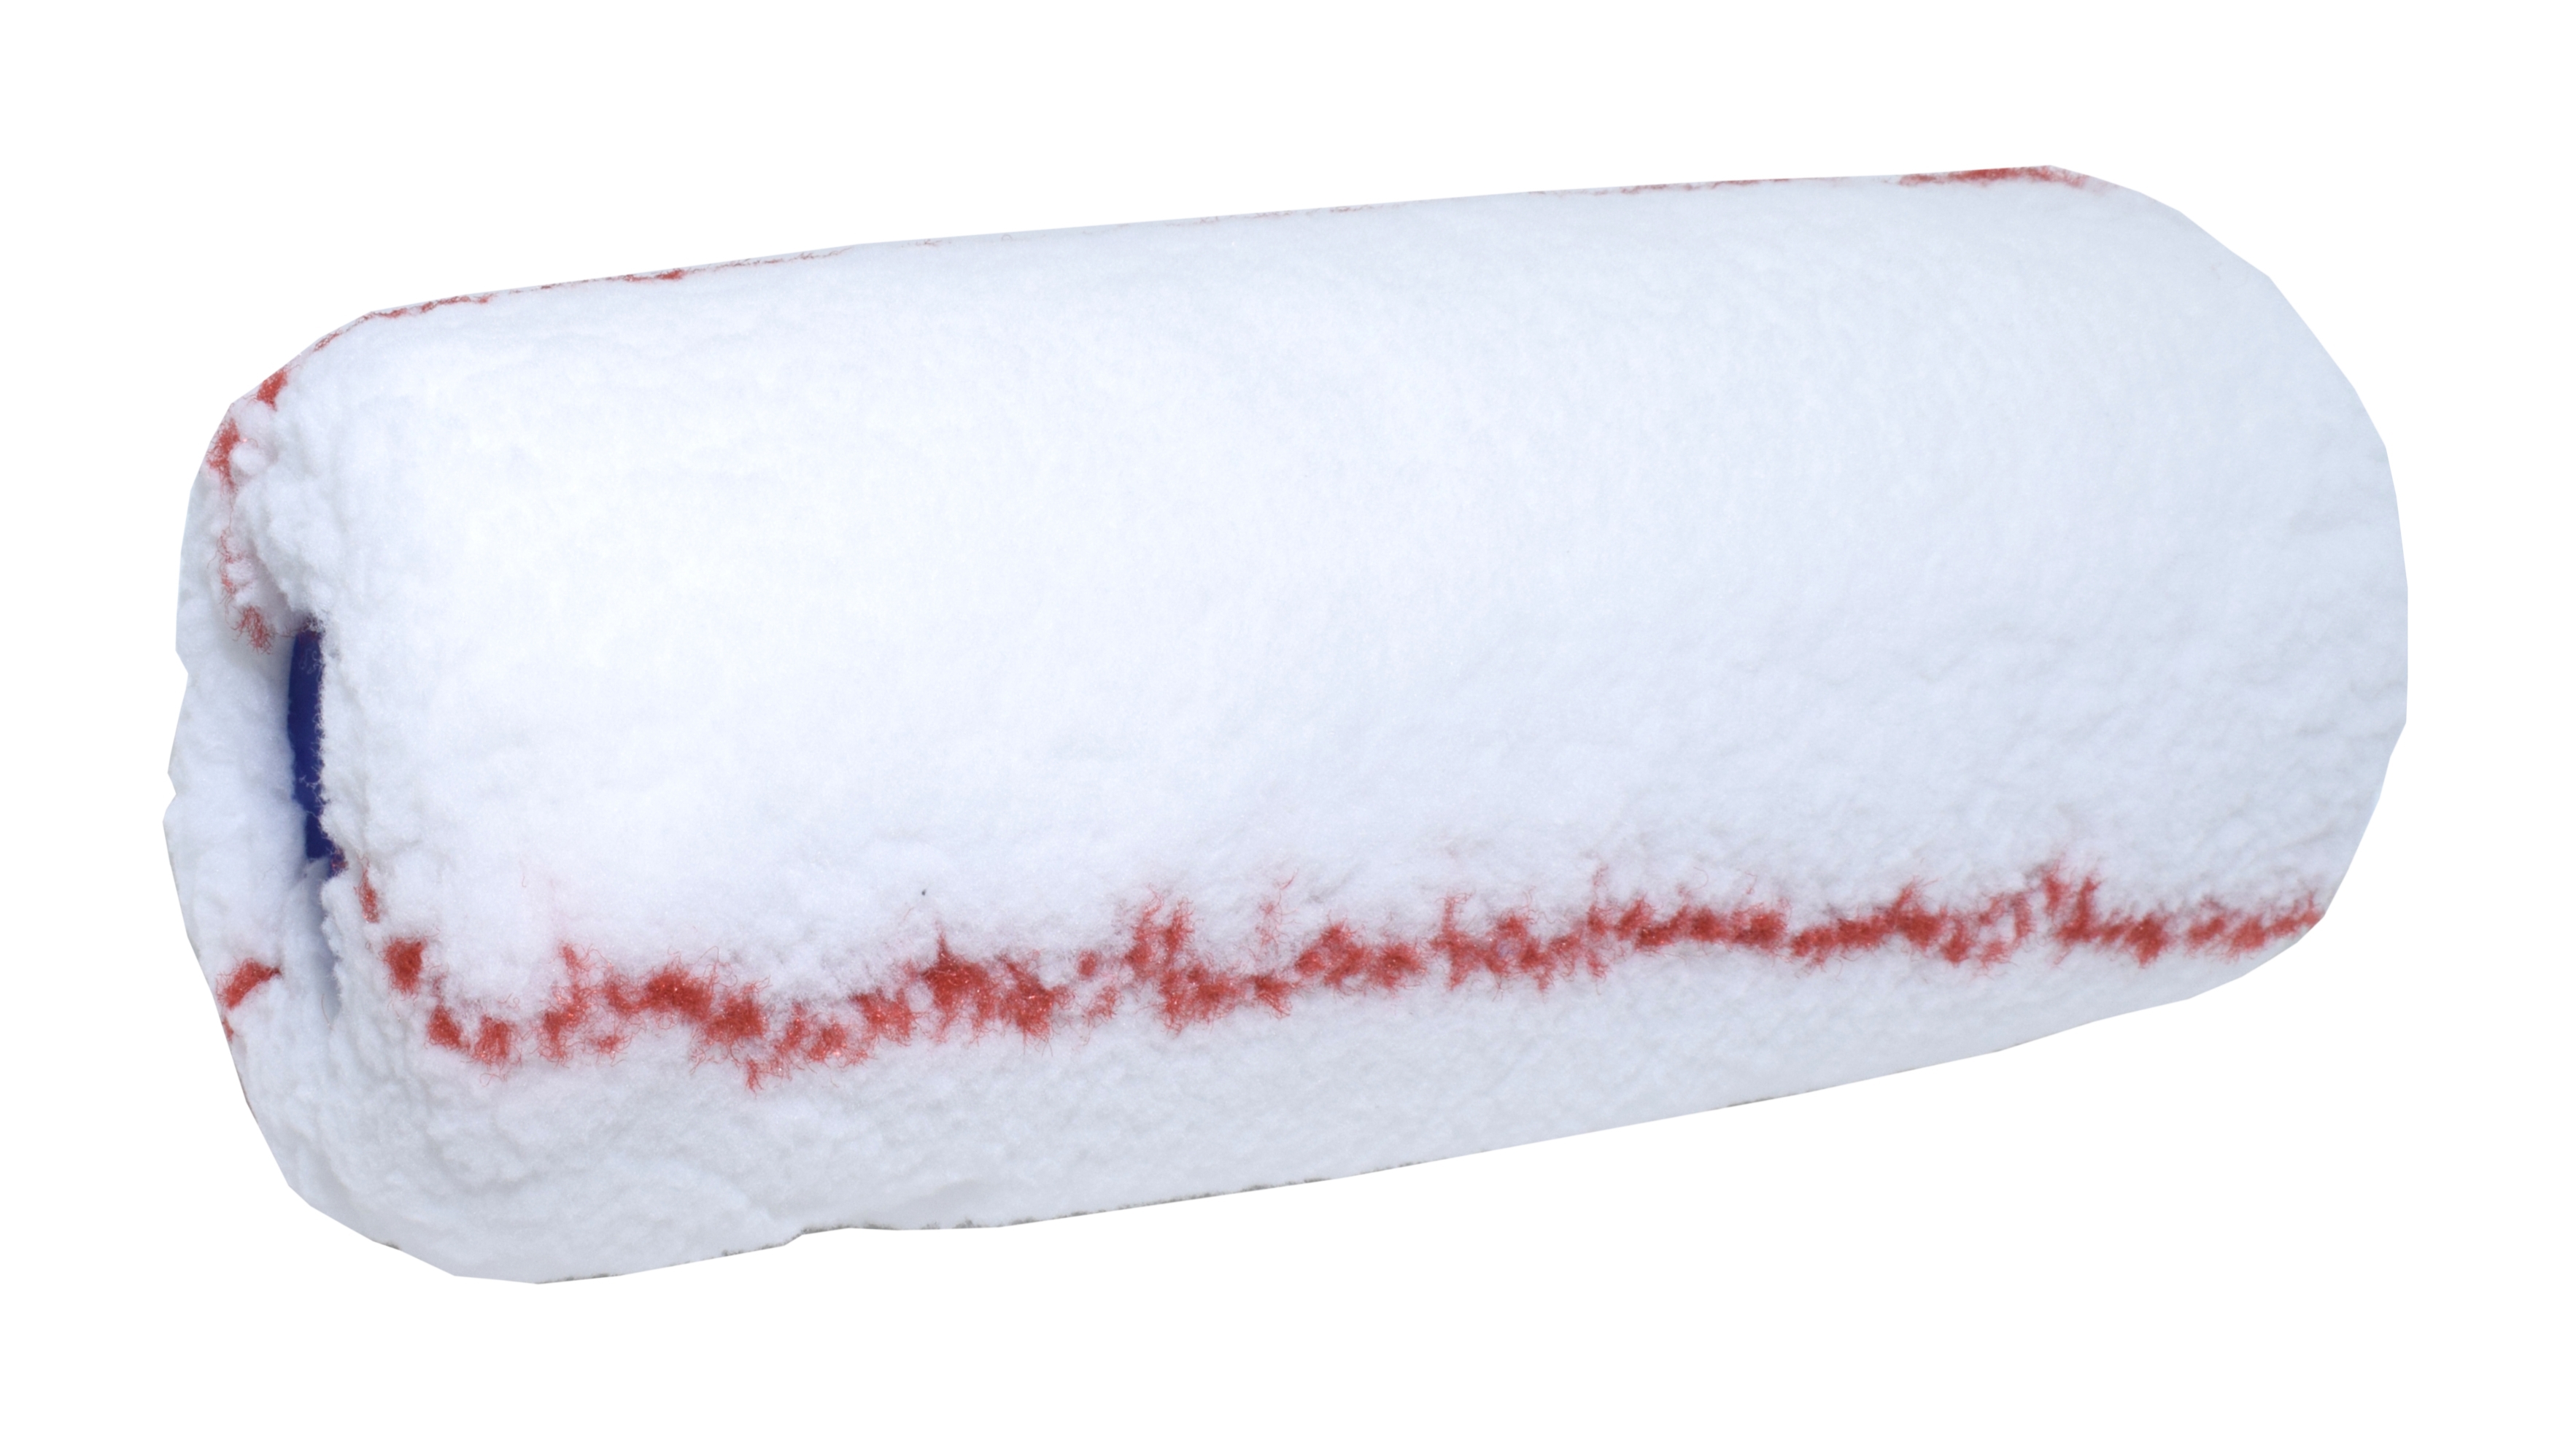 Polyester Top Coat Roller padded 8 mm
Pile 18 mm